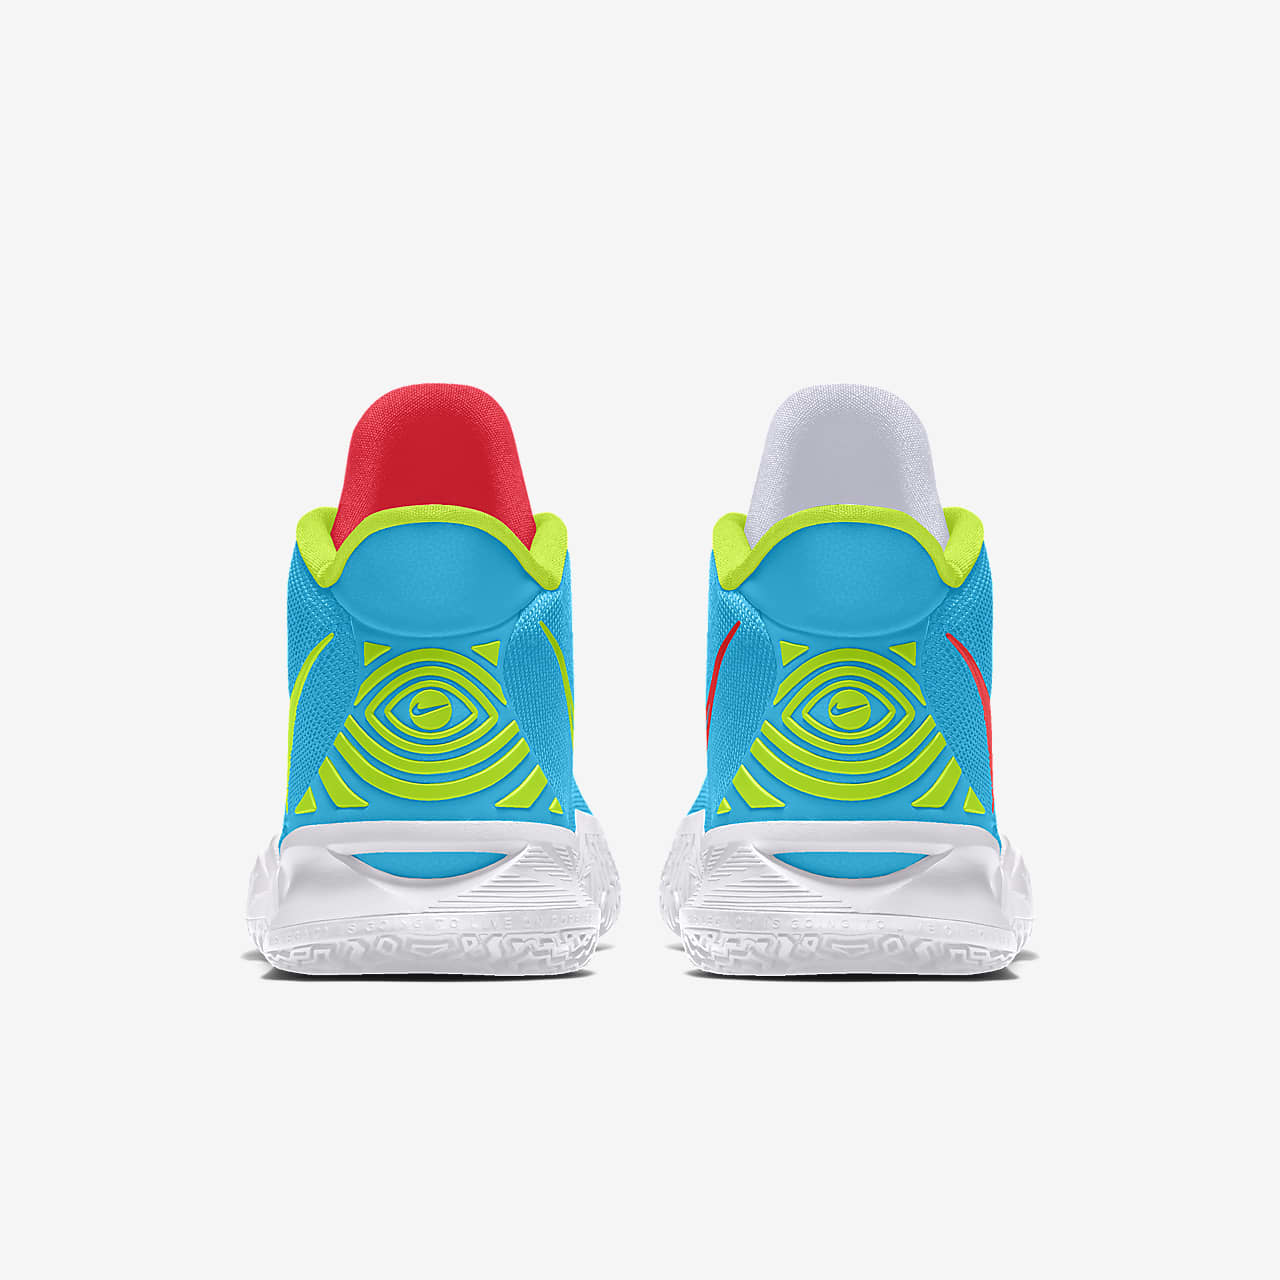 kyrie 4 design your own